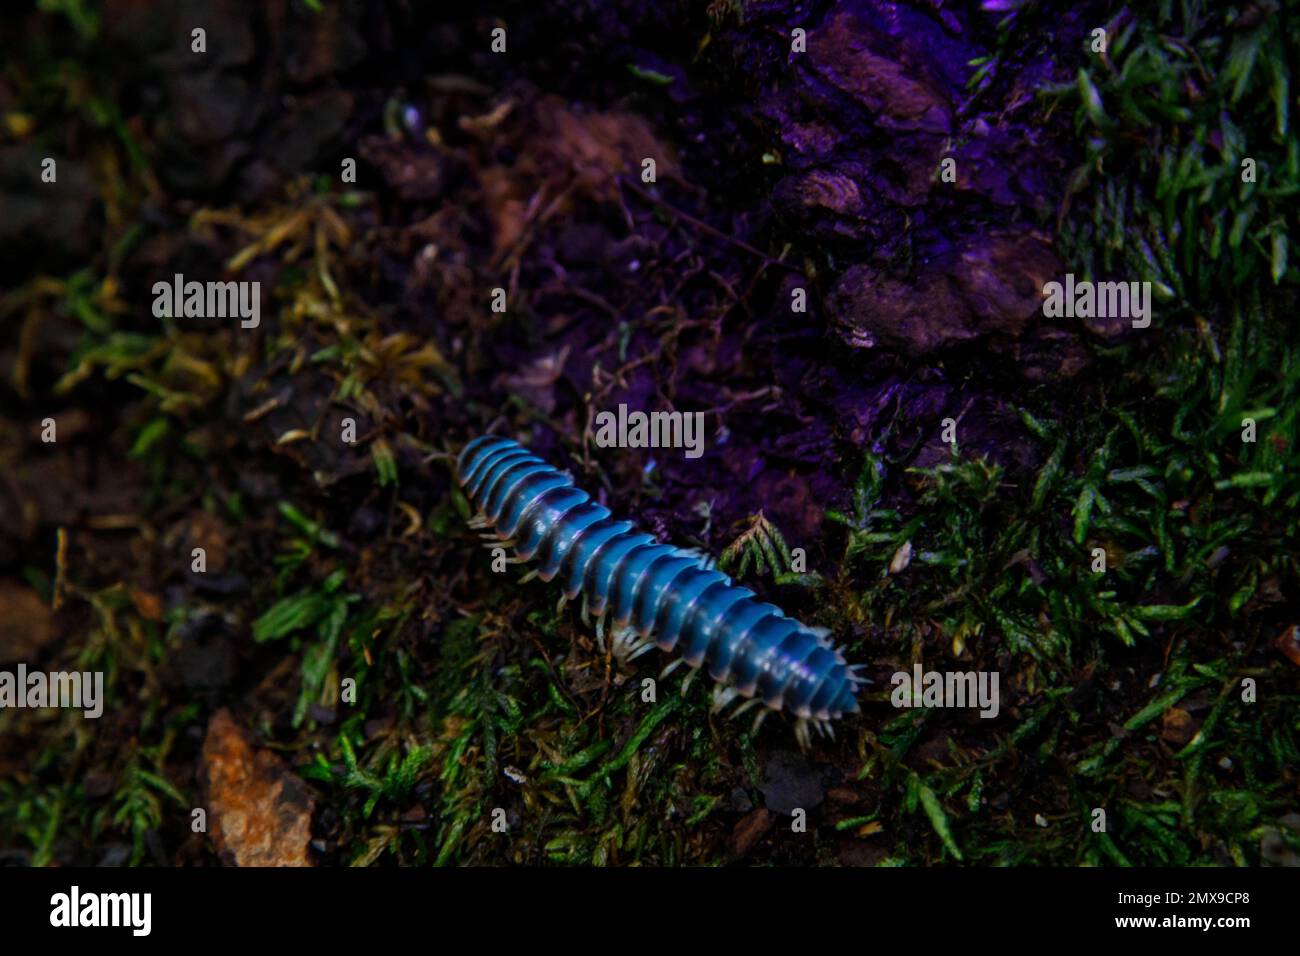 Ultraviolet light reveals biofluorescence in the Flat-backed Millipede (Cherokia georgiana) at night, Great Smoky Mountains National Park, Tennessee. Stock Photo